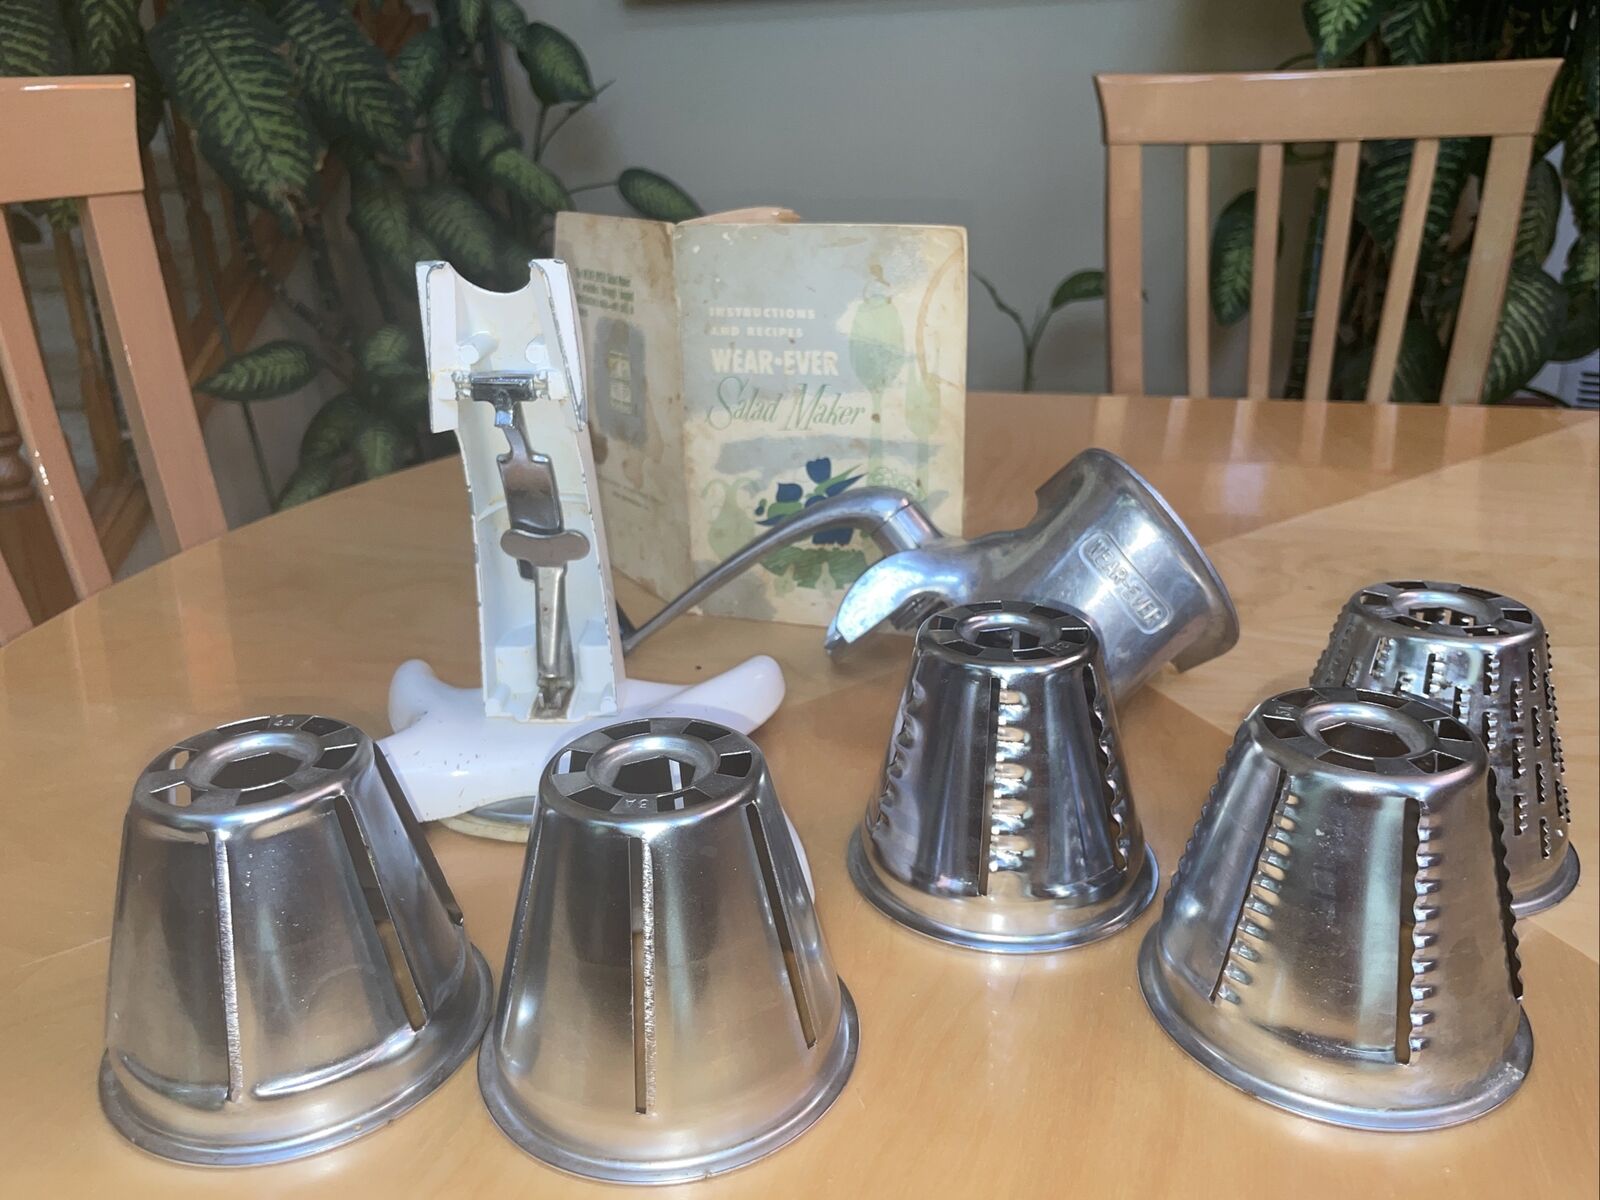 Vintage Wear-Ever Salad Maker Food Processor Replacement Set Of 5 Cones Book See